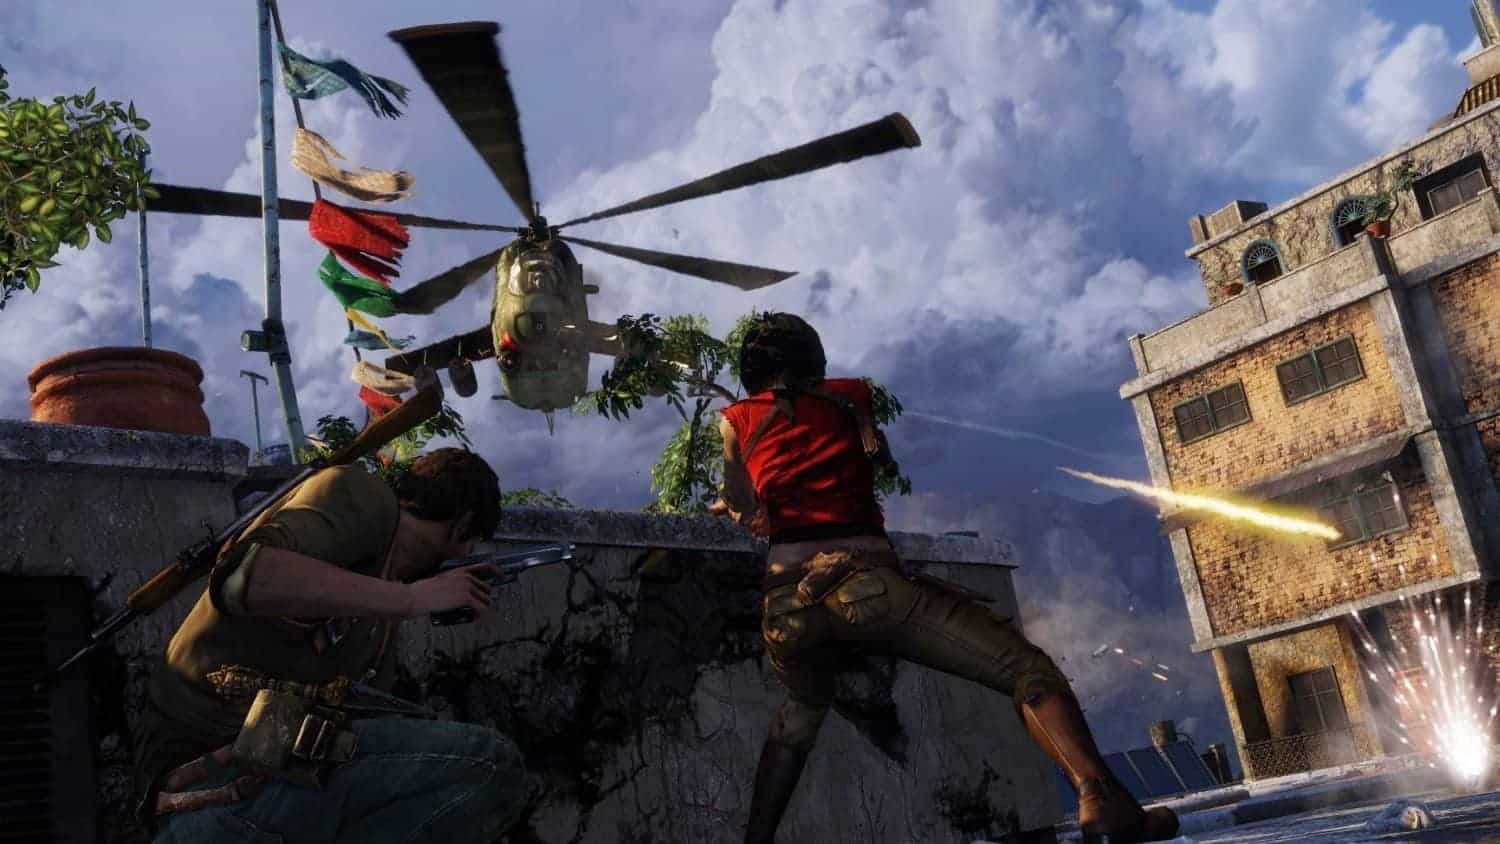 Drake and Chloe fighting a helicopter